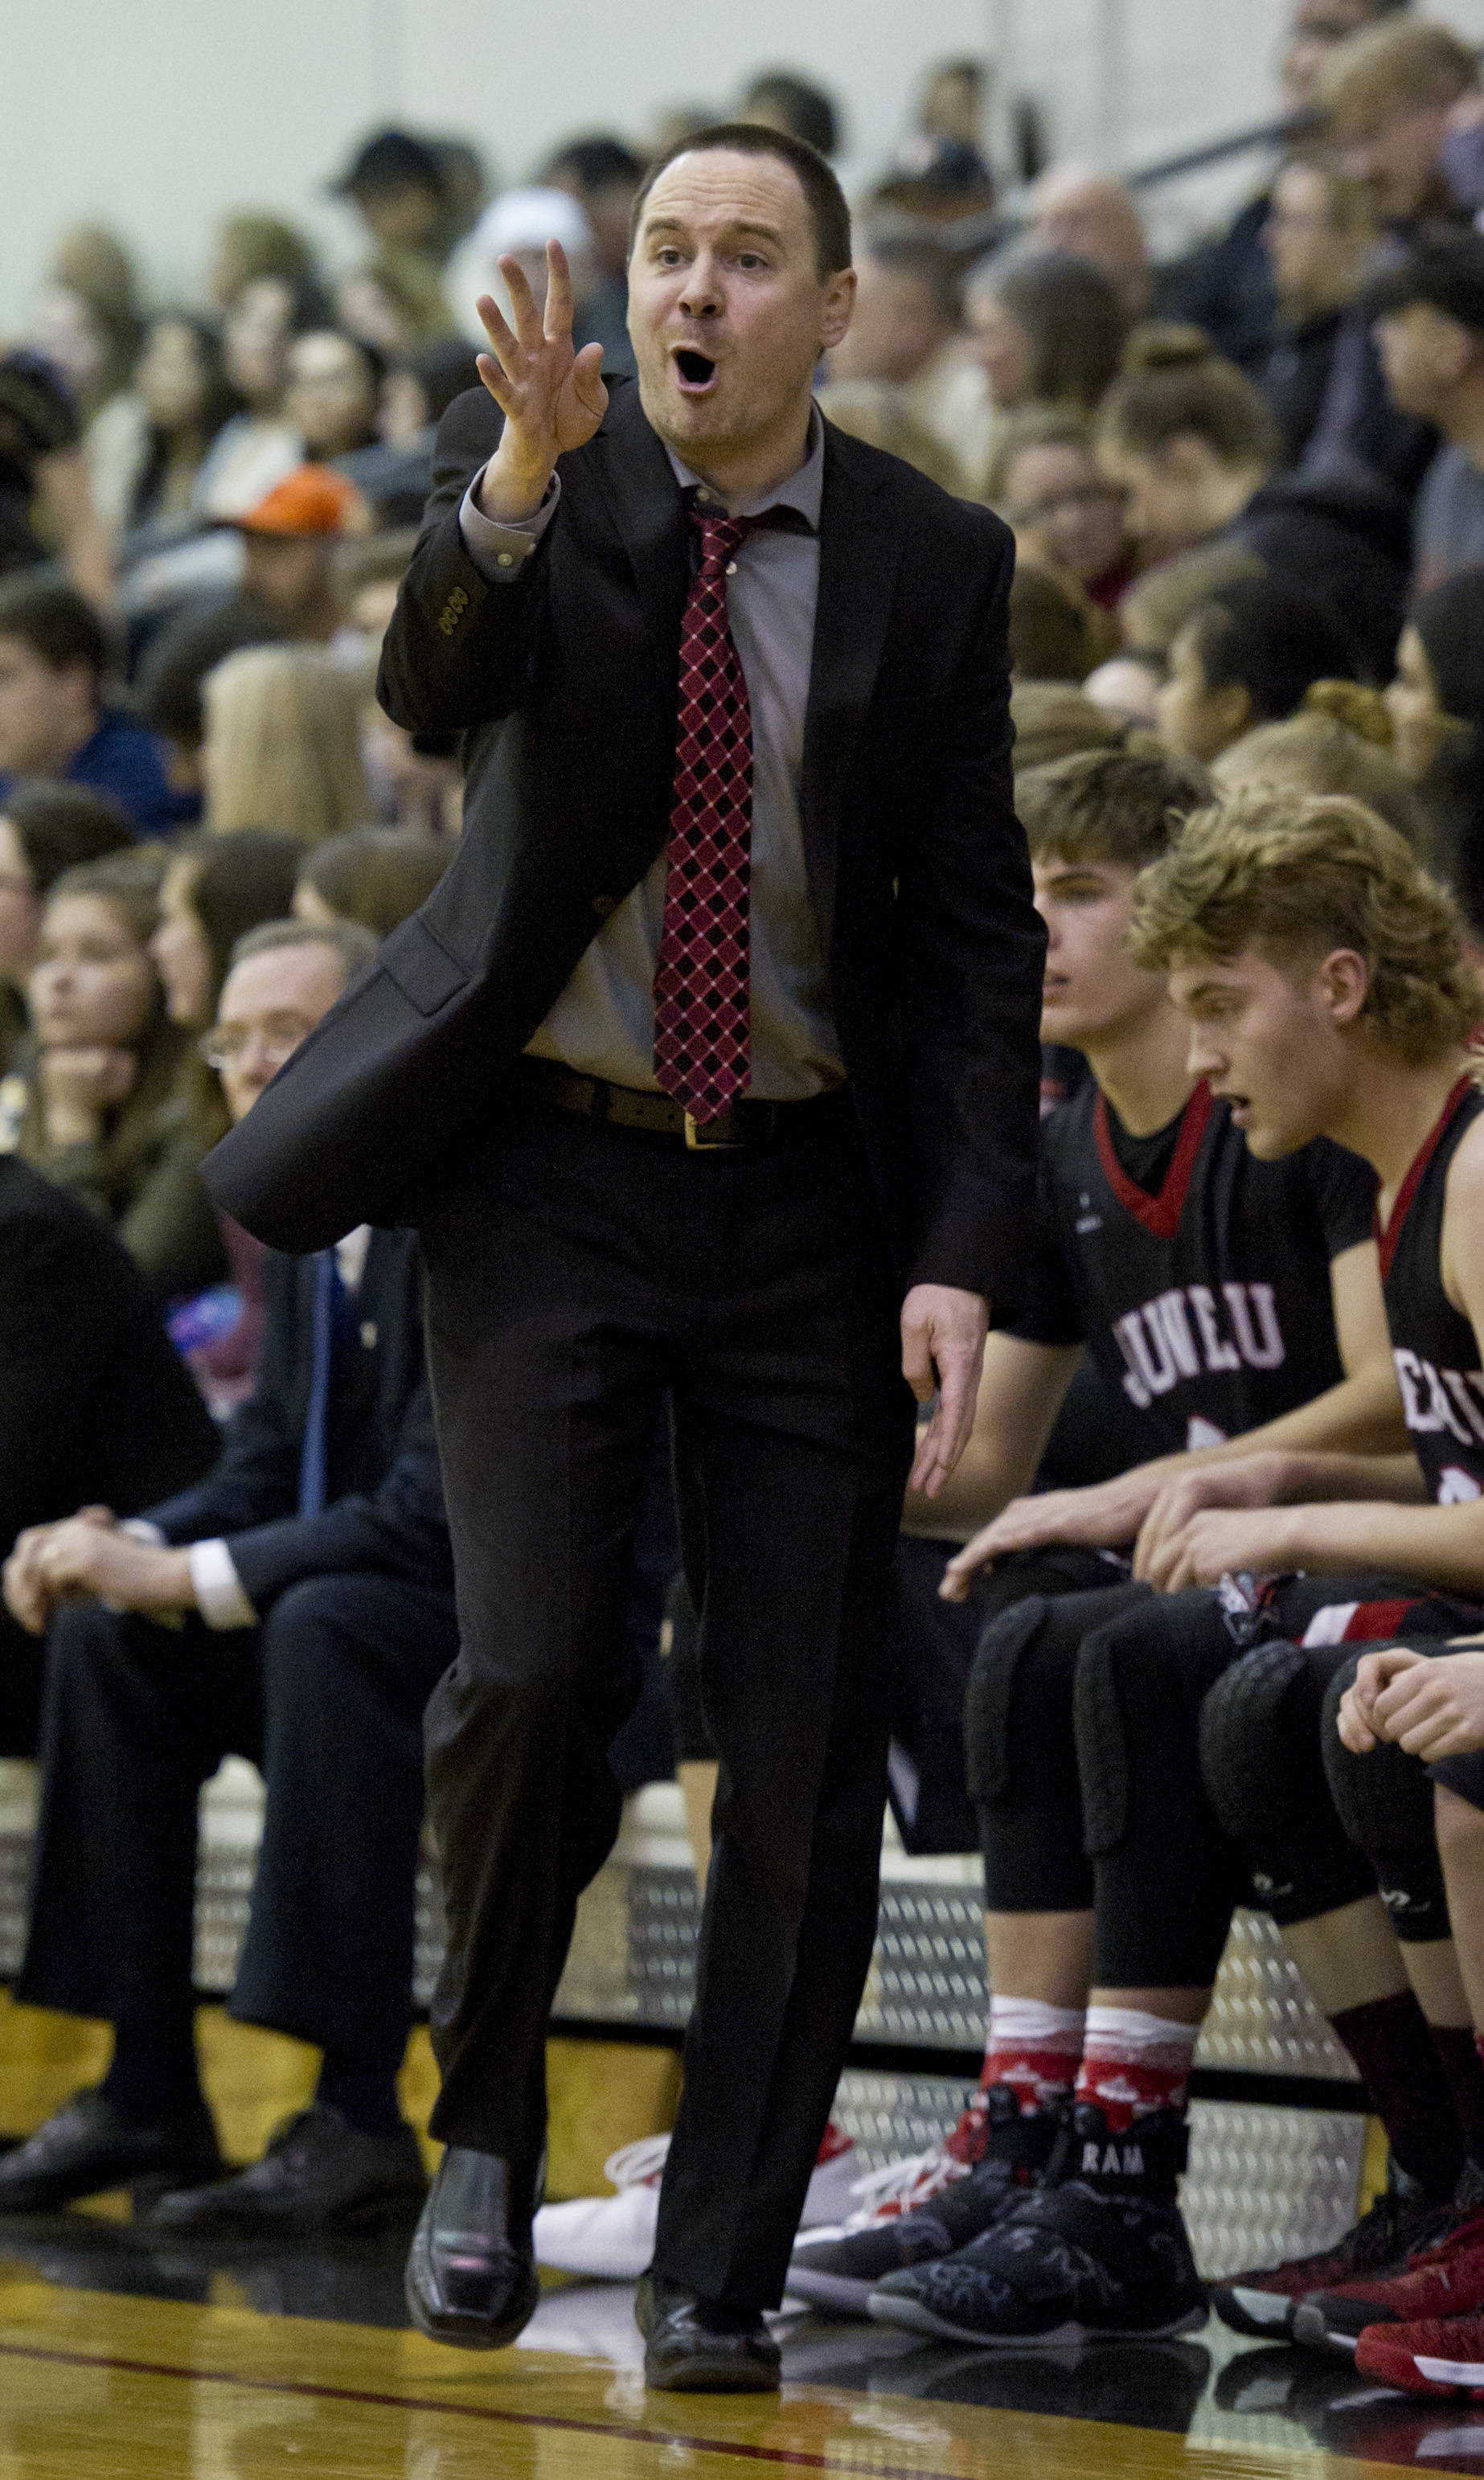 Juneau-Douglas’ head coach Robert Casperson yells out instructions as his team plays against Dimond High School in the Capital City Classic at JDHS on Friday, Dec. 30, 2016. (Michael Penn | Juneau Empire File)